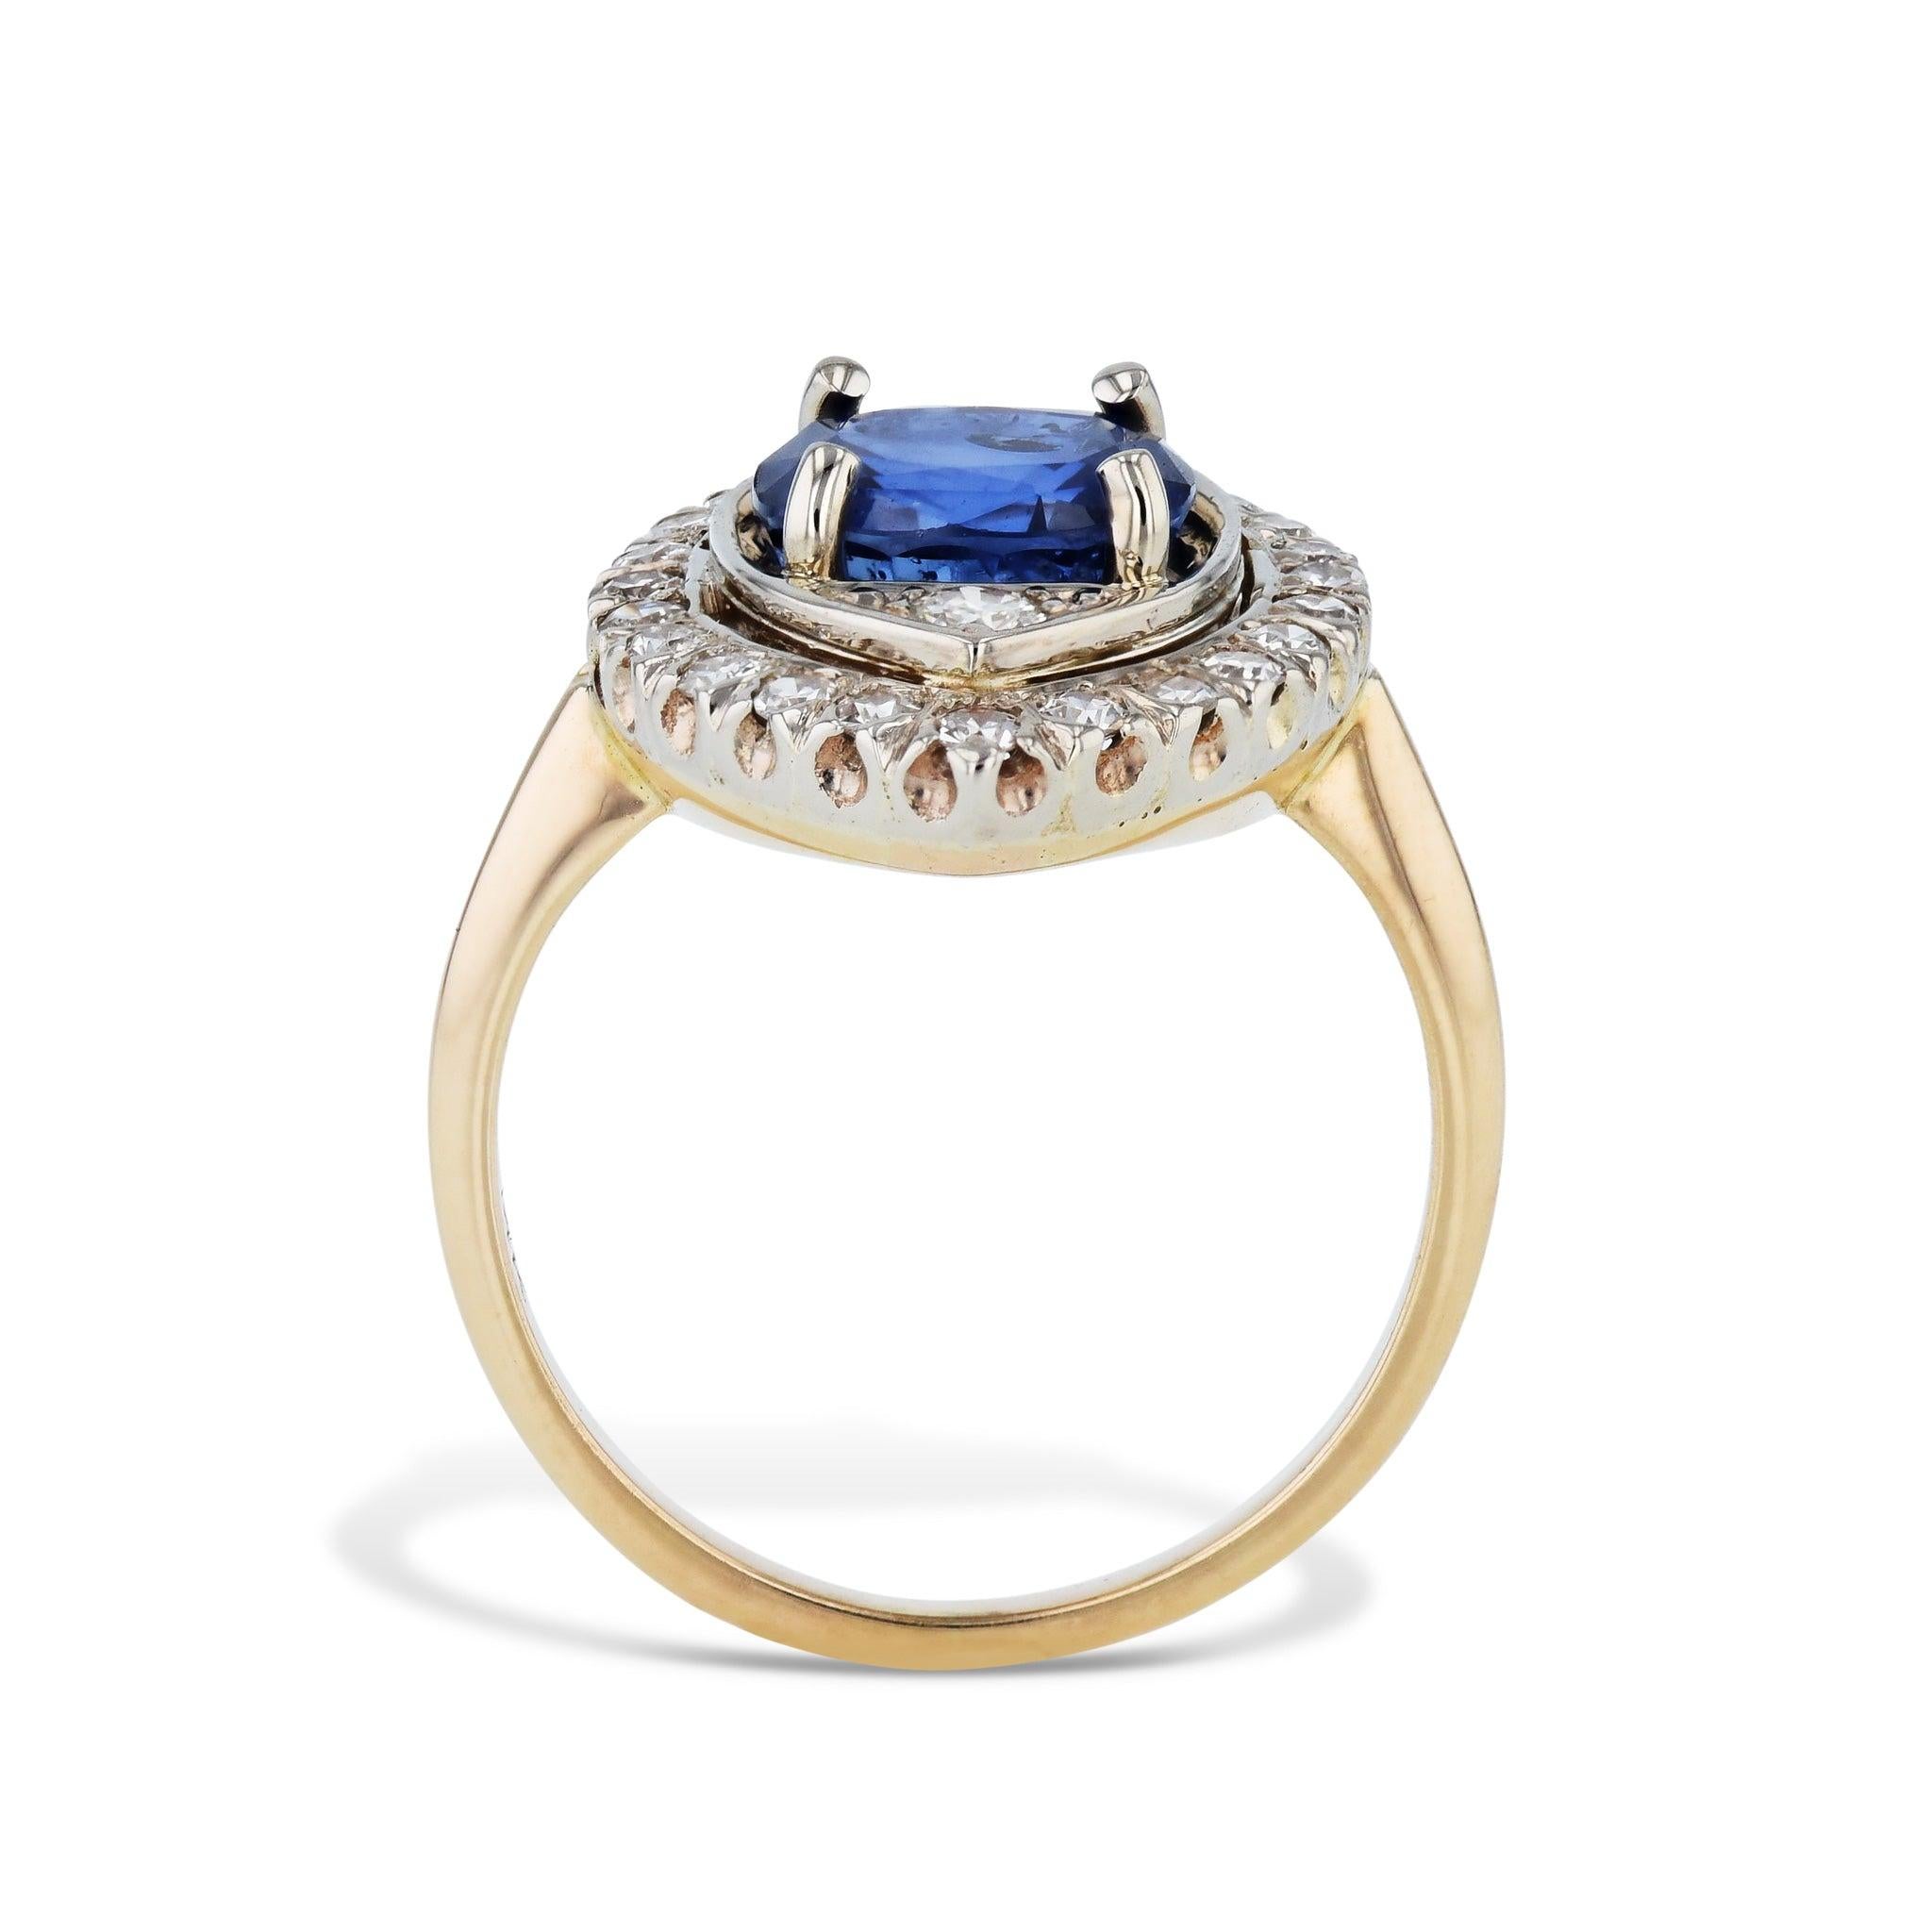 Fall in love with this stunning Natural Blue Sapphire Diamond Estate Ring. Crafted  in 14kt White & Yellow gold with a 3.66ct Titanium Diffused Natural Blue Sapphire, and 26 Single cut Diamonds. The Diamonds surround the center Sapphire to create a